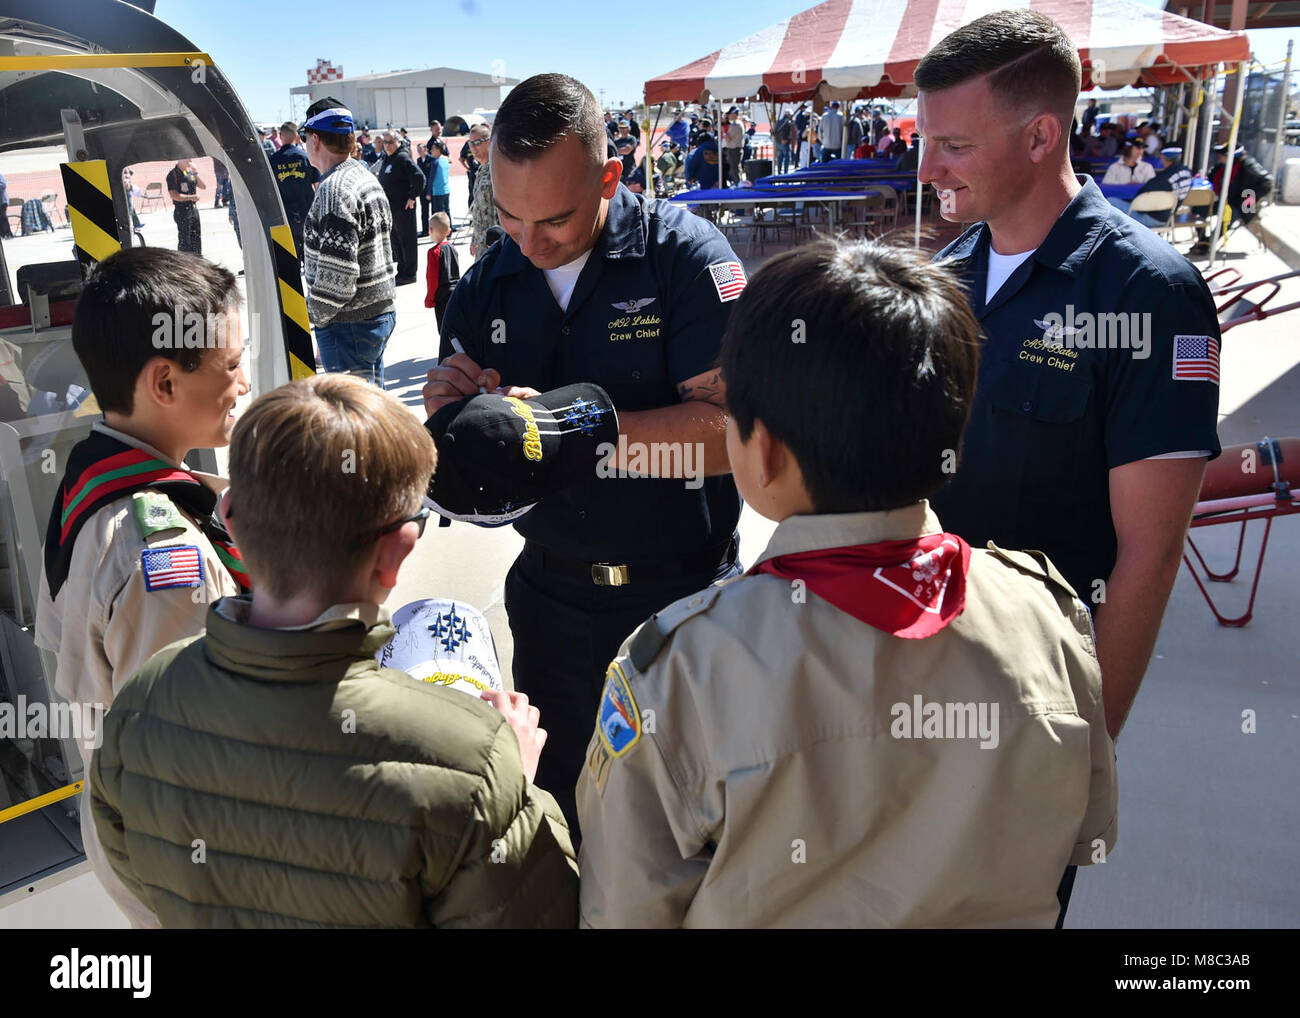 EL CENTRO, Calif. (Feb. 24, 2018) Blue Angels Crew Chiefs, Aviation Ordnanceman 2nd Class, Josh Labbe, and Aviaton Ordnanceman 1st Class, Brandon Bates, sign autographs for local Boy Scouts following a practice demonstration. The Blue Angels are scheduled to perform more than 60 demonstrations at more than 30 locations across the U.S. in 2018. (U.S. Navy Stock Photo